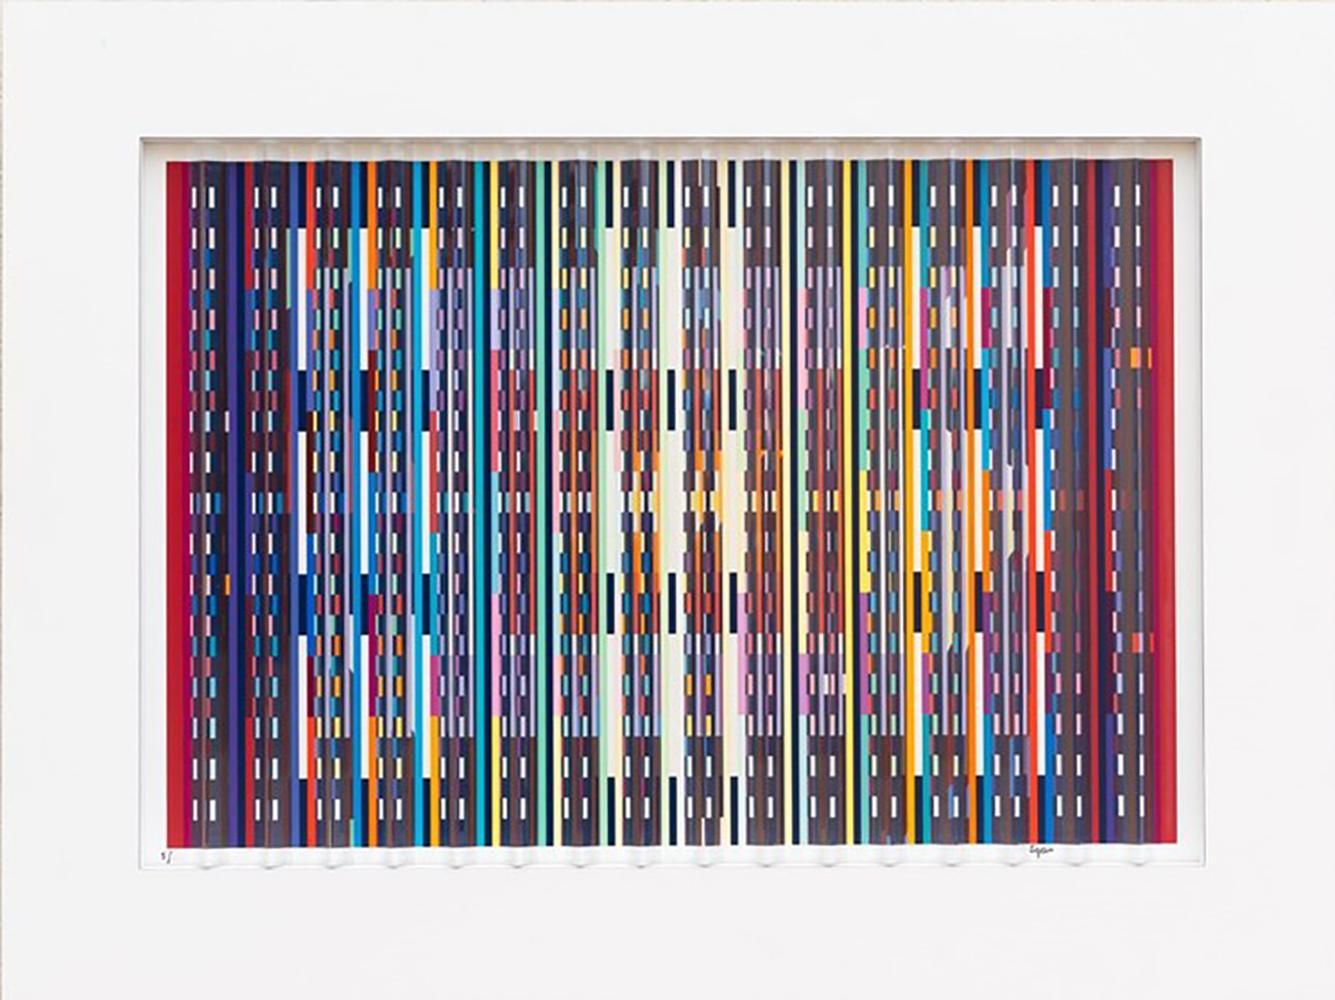 Yaacov Agam
"Fascination"
1995
Prismograph, Color Serigraph with Transparent Prisms.
“Fascination” is a 3-Dimensional self-framed 69-color serigraph wall sculpture with an integral white frame.
It incorporates sixteen hand-cut and polished vertical